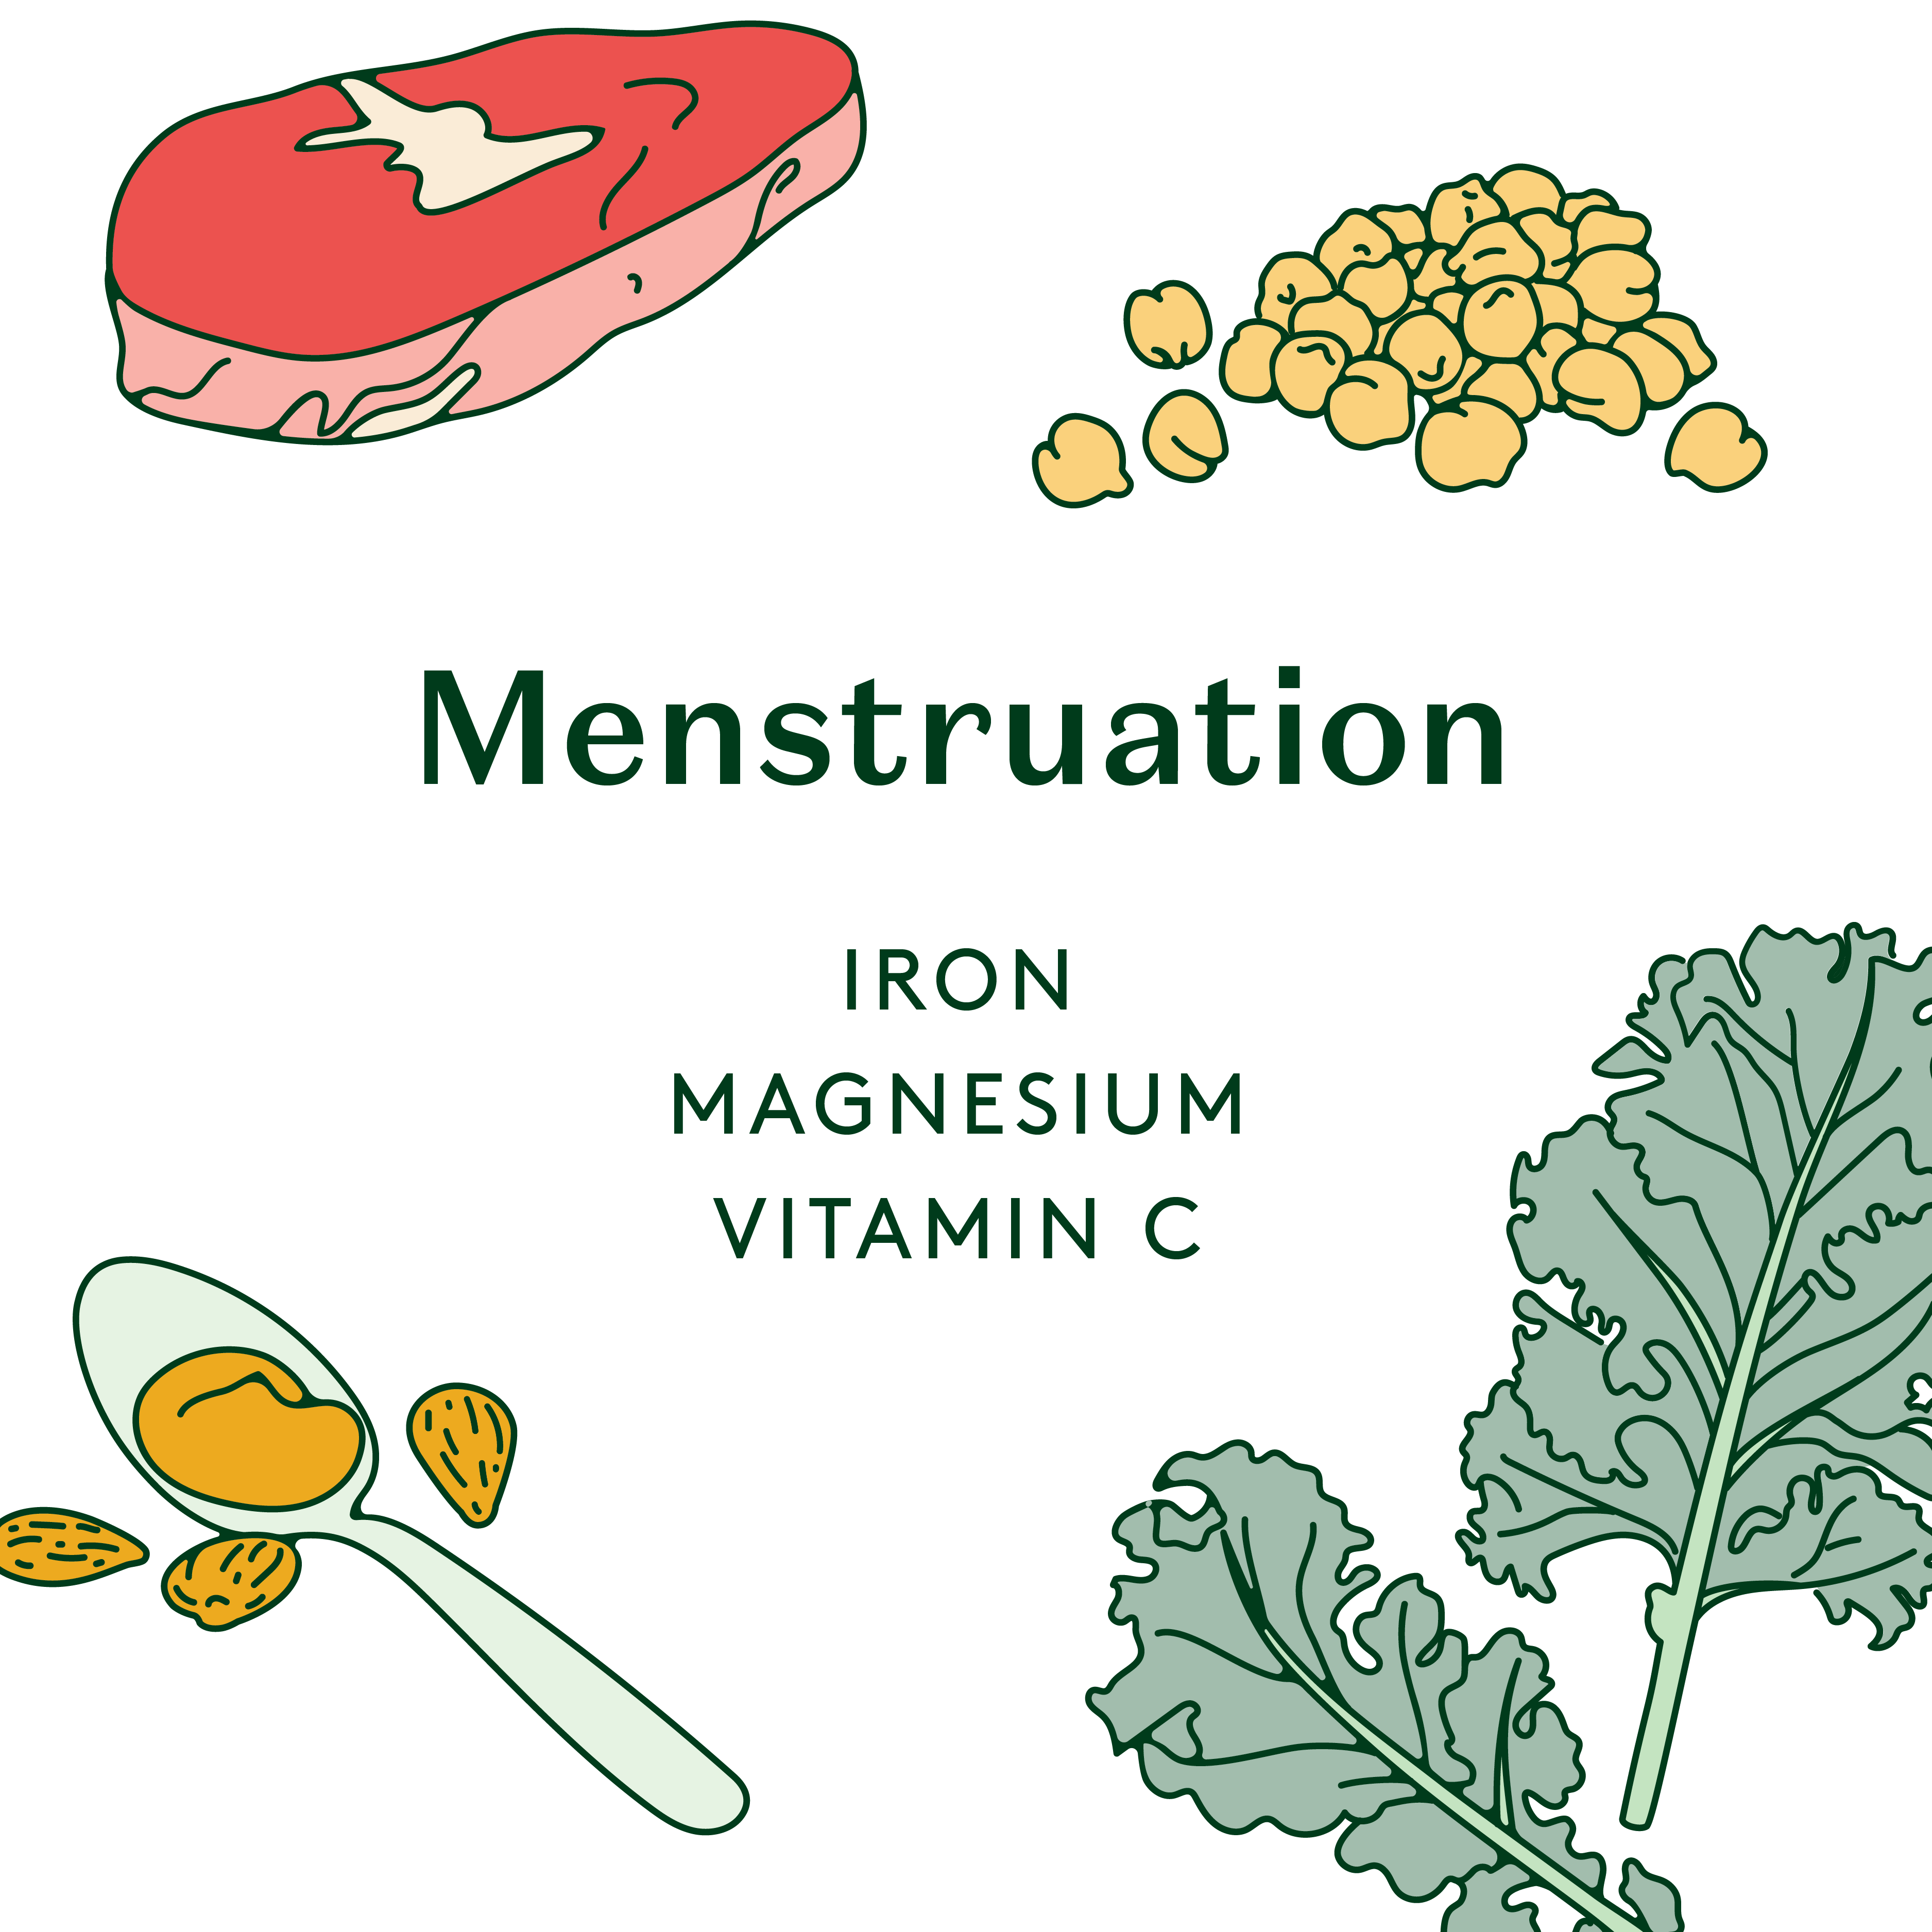 Menstrual health and nutrition